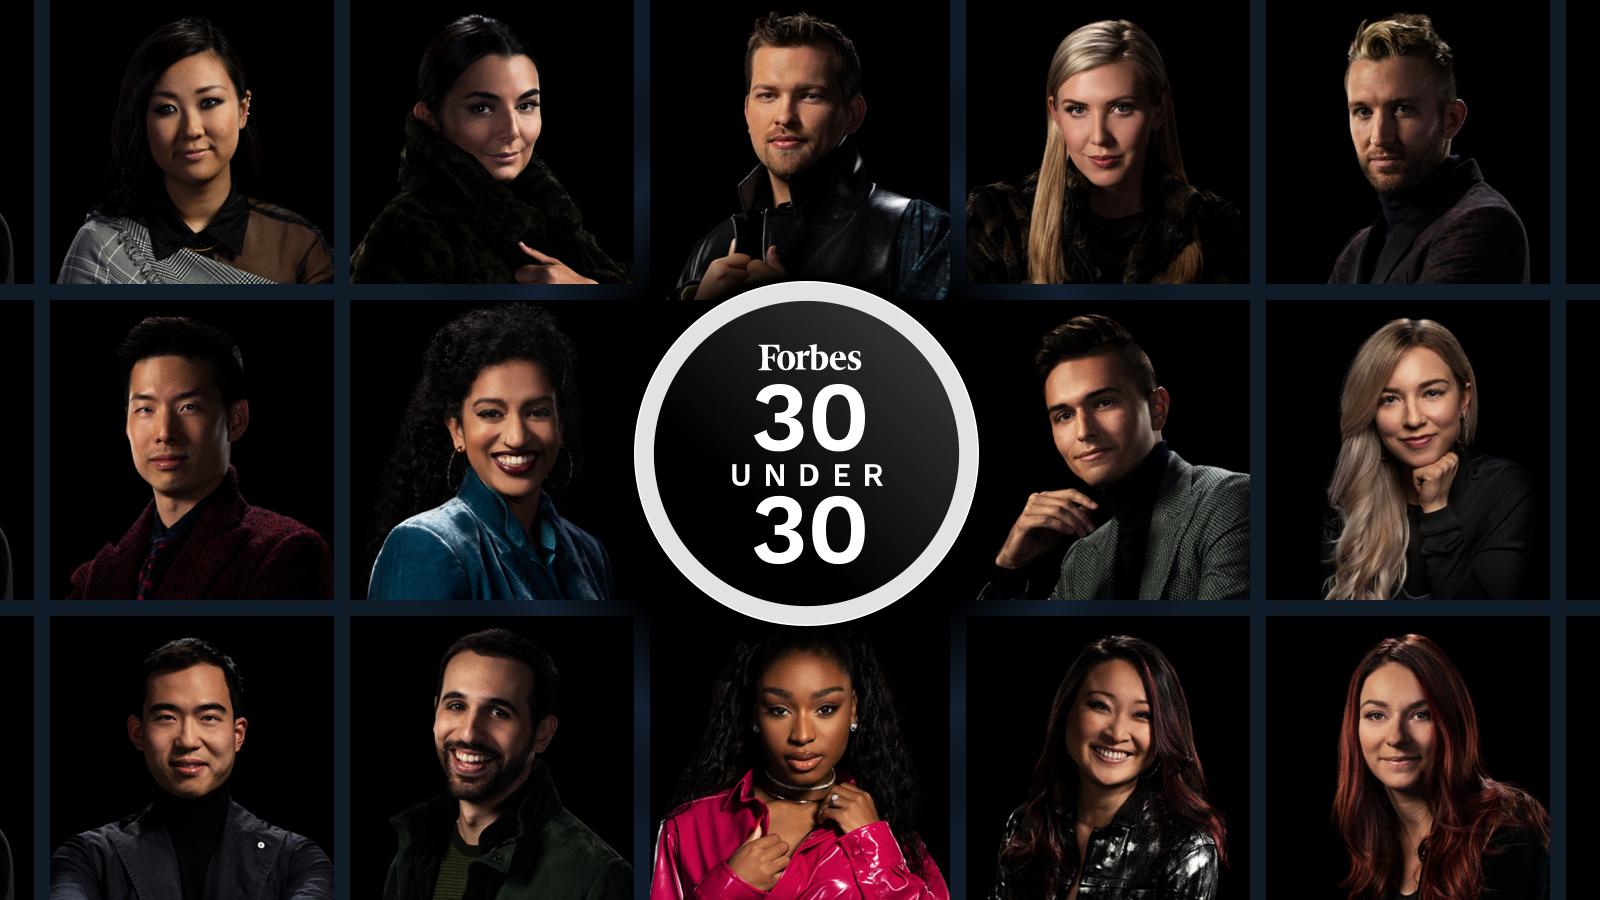 Forbes 30 Under 30 2021: Nominate the young innovators changing the world